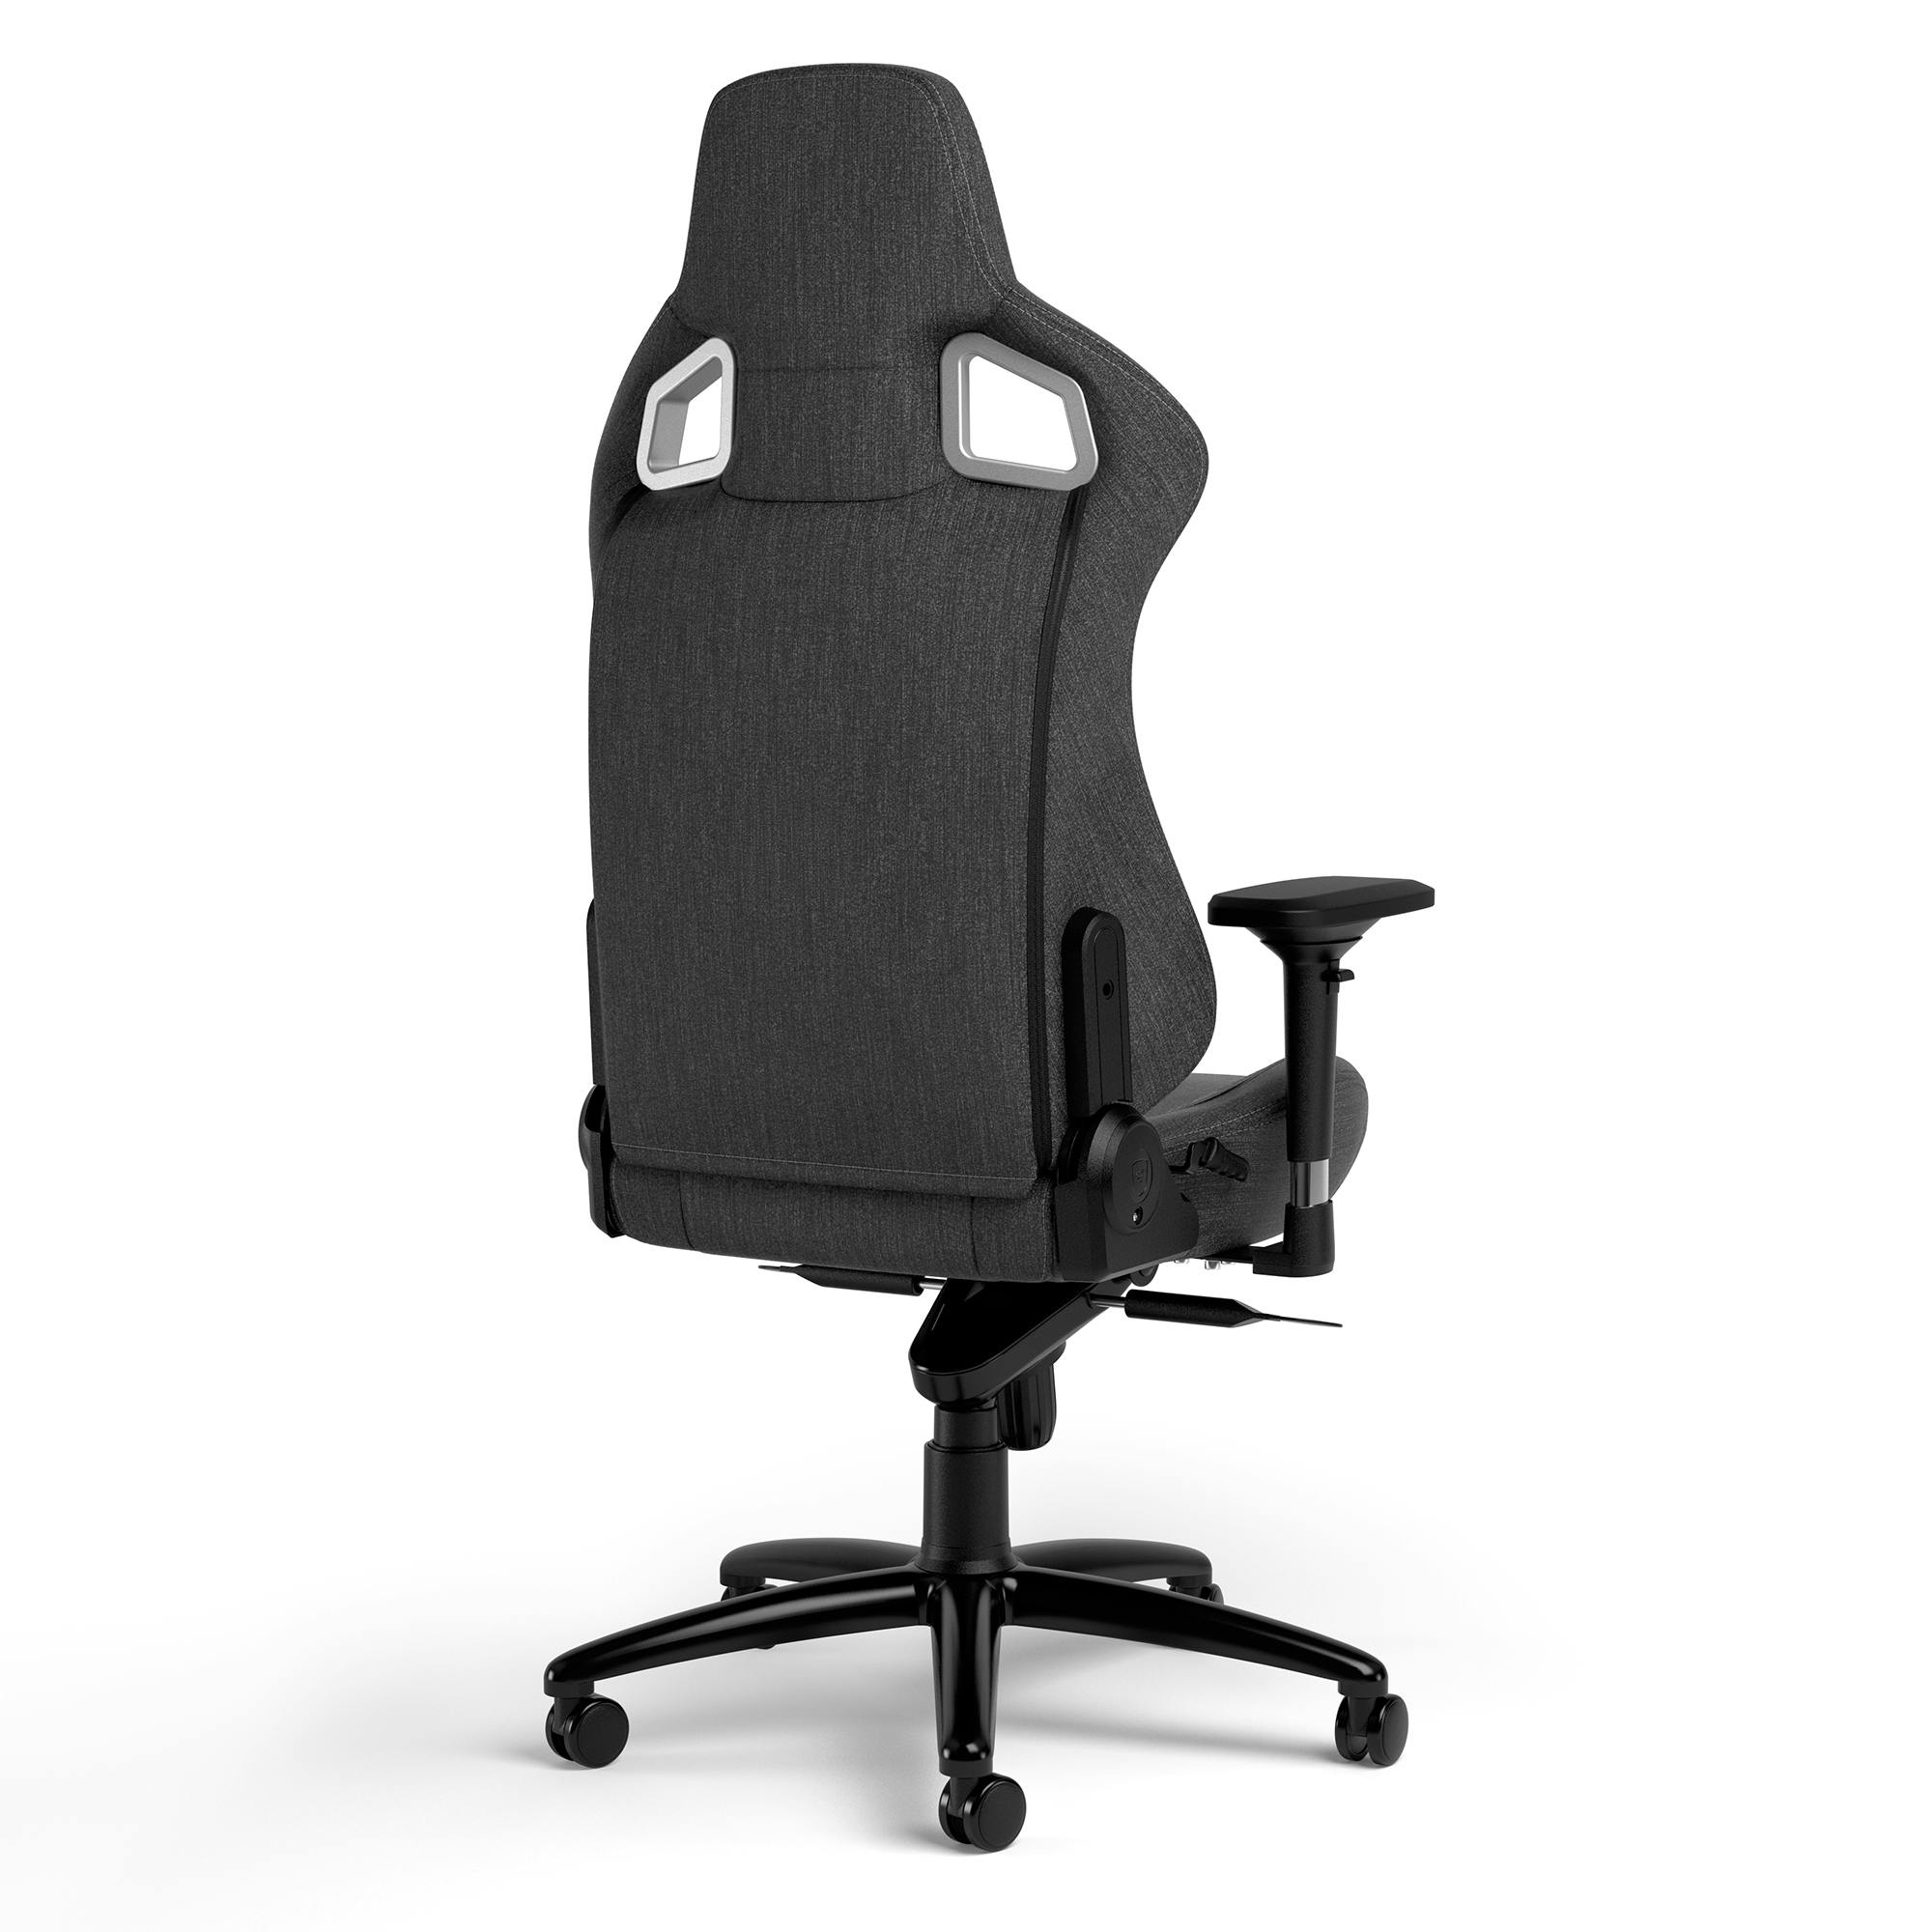 EPIC TX Gaming Chair with Fabric Cover | noblechairs | noblechairs